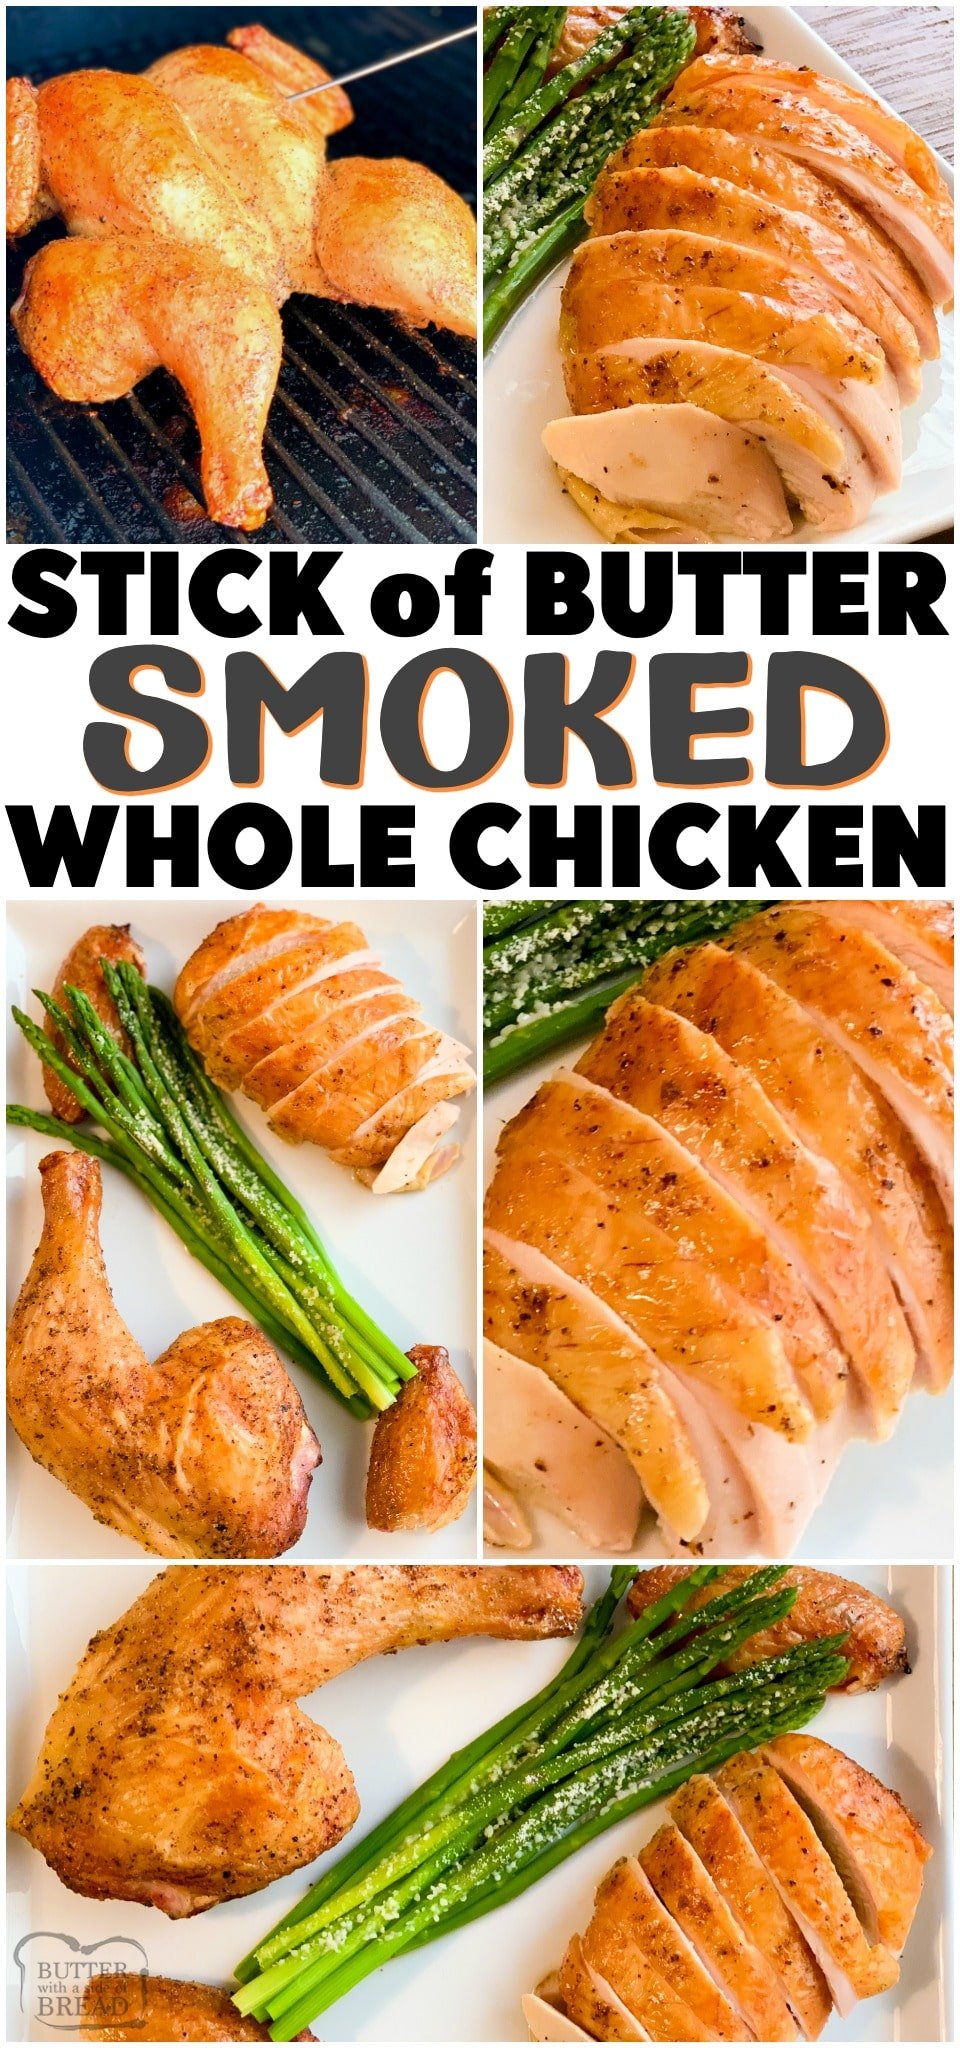 Butter Smoked Whole Chicken that's moist and super flavorful! Spatchcocked chicken cooked in a smoker, brushed with a stick of melted butter and fresh herbs for a perfect whole chicken dinner. #smokedchicken #chicken #butter #grilling #easydinner #dinnerrecipe #chickendinner #smoked #recipe from BUTTER WITH A SIDE OF BREAD